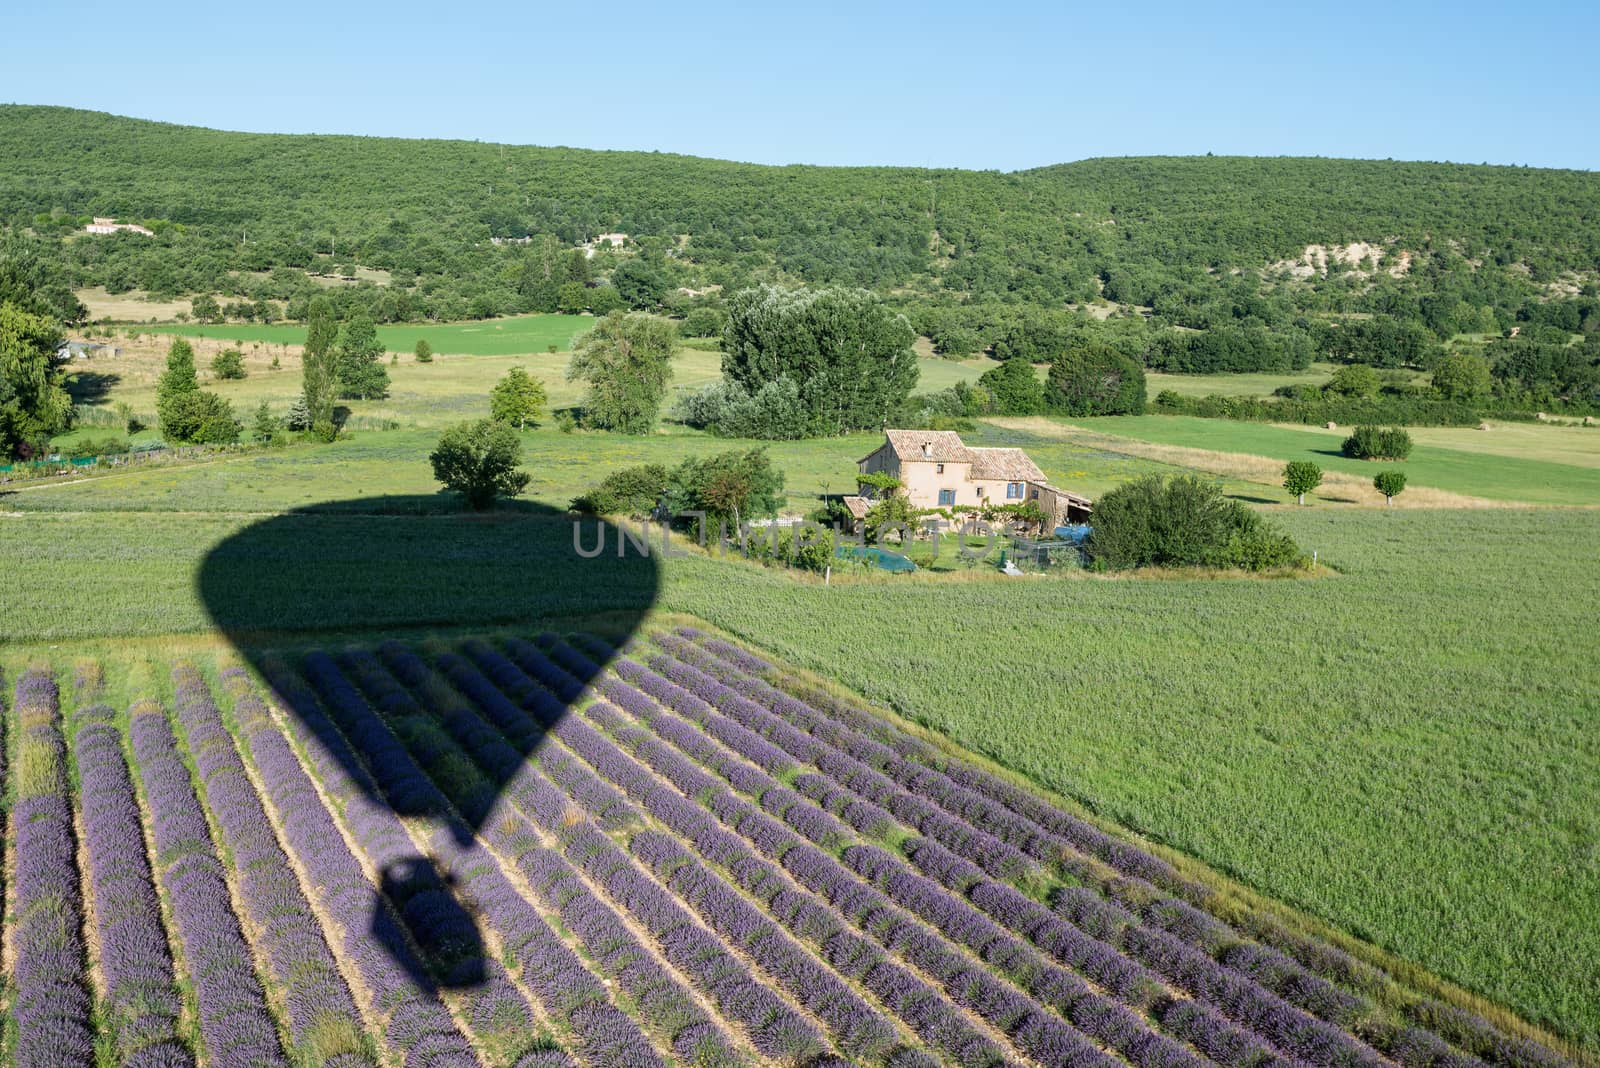 A balloon shadow over the lines of lavender bushes and green fields near a private house at Provence